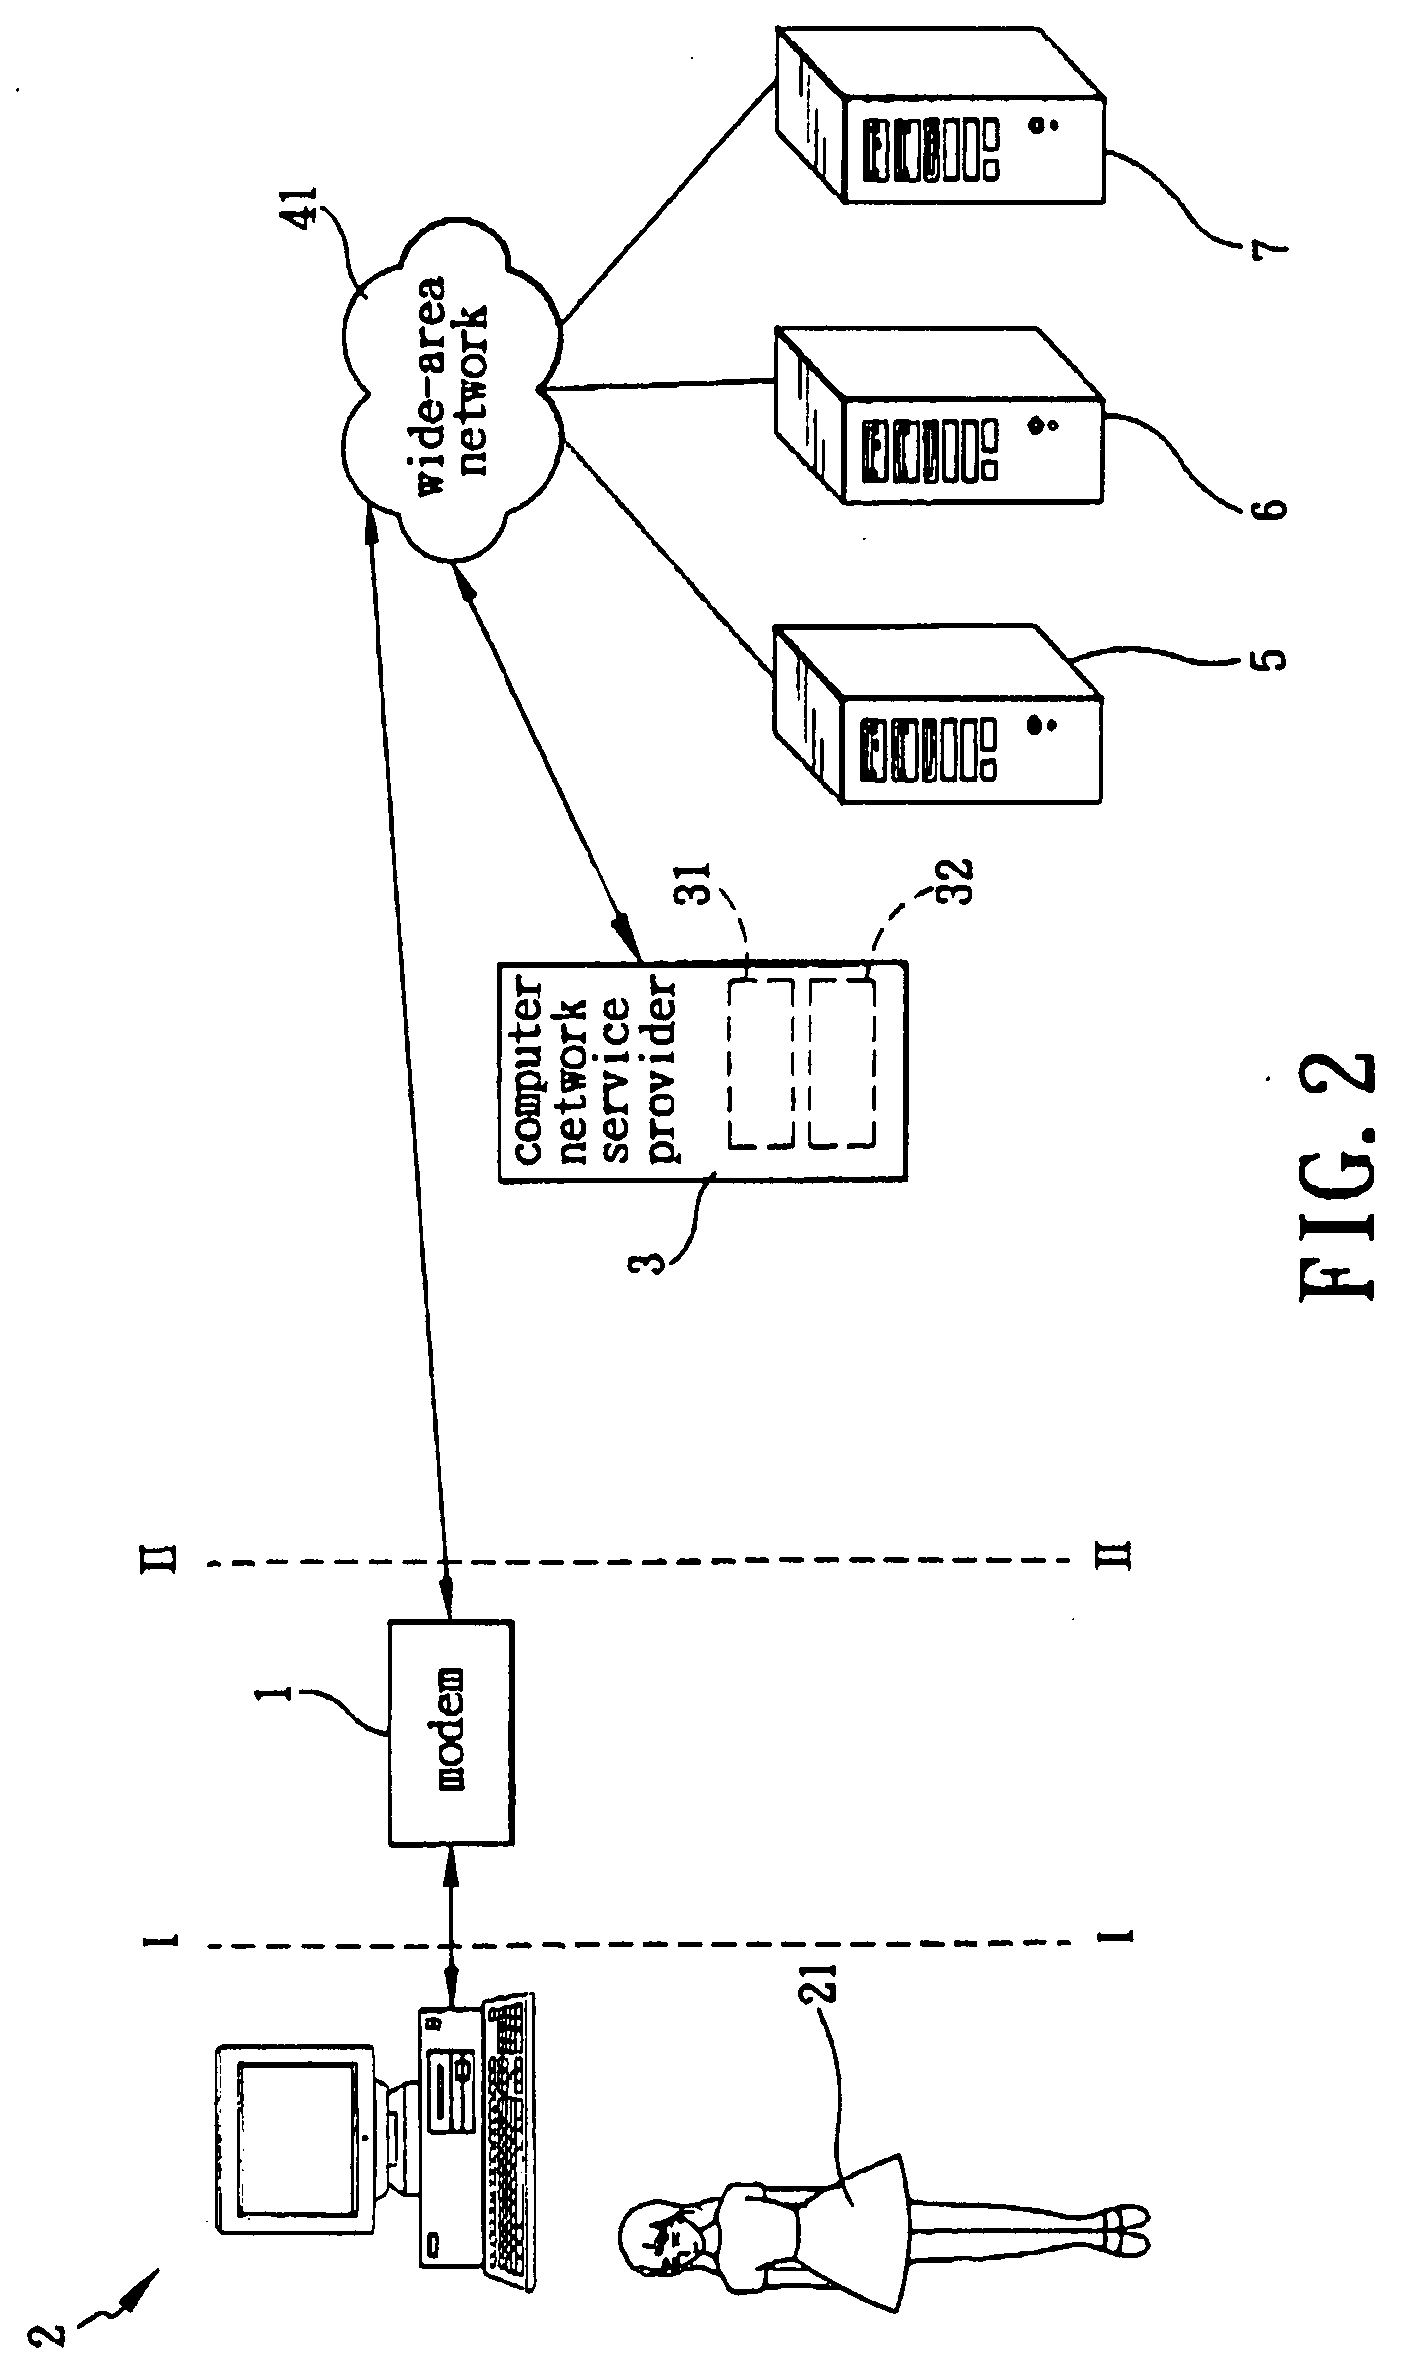 Method for registering a domain name and signing up with a search website using a computer network service provider on behalf of a user, and a modem